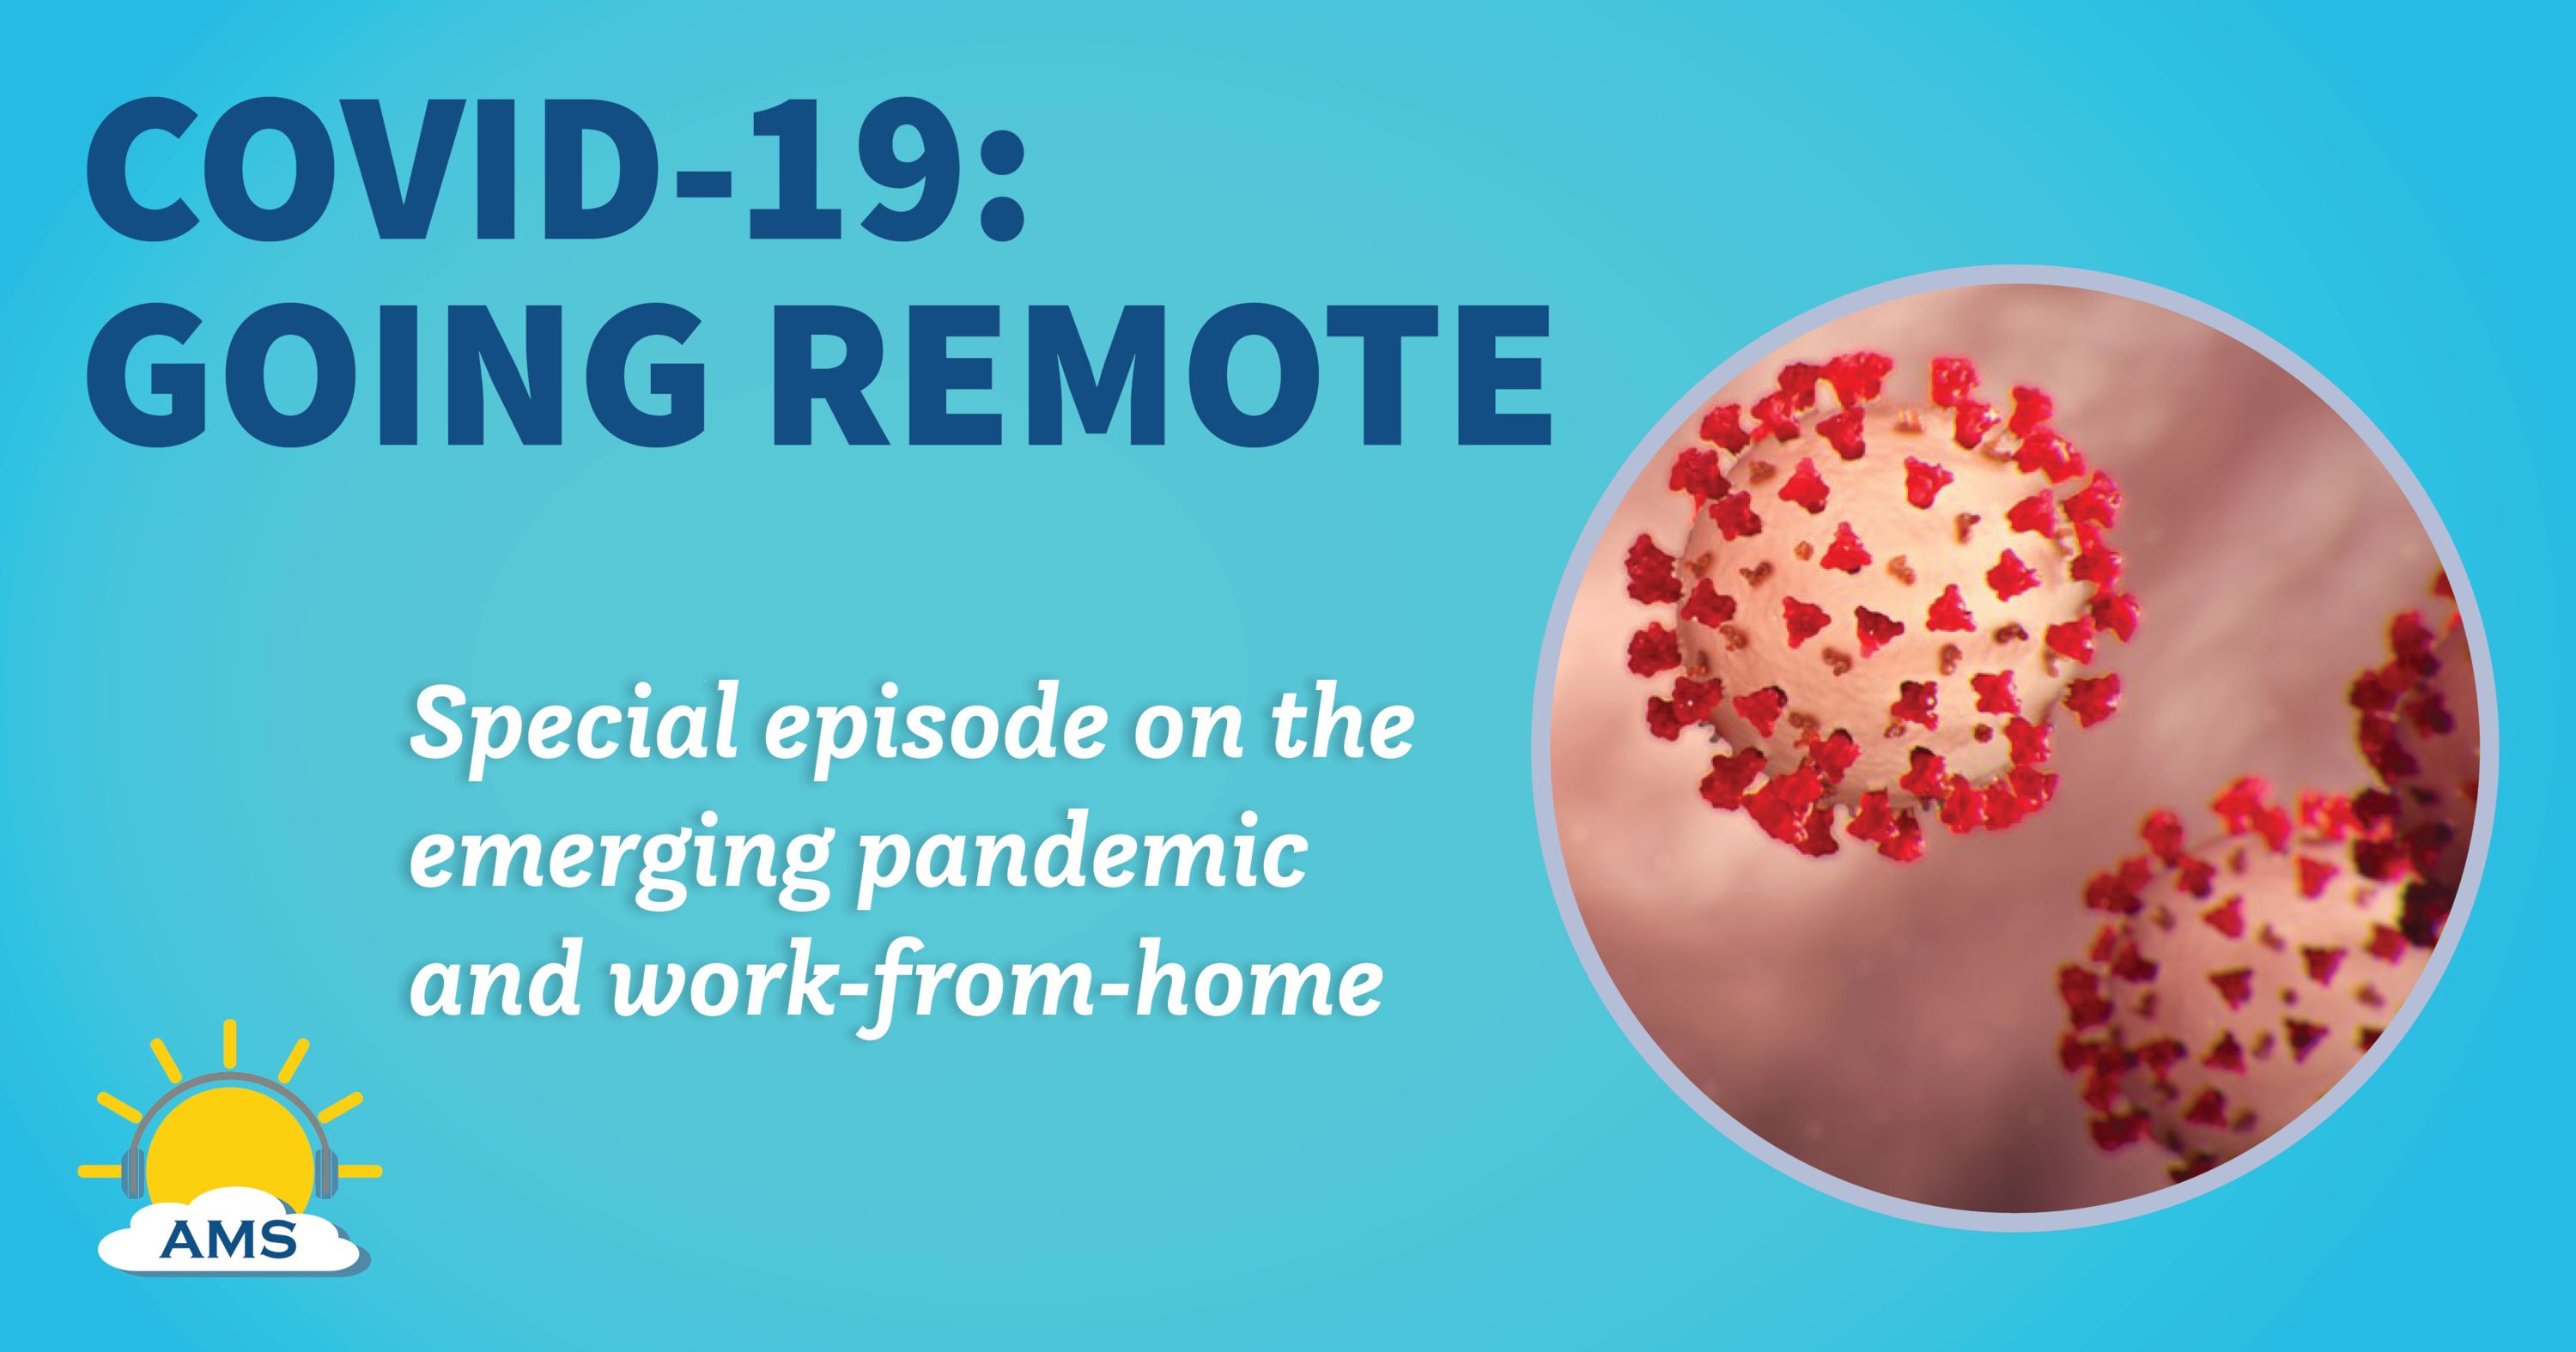 graphic collage with microscopic illustration of COVID-19 virus and teaser text that reads &quotspecial episode on the emerging pandemic and work-from-home"